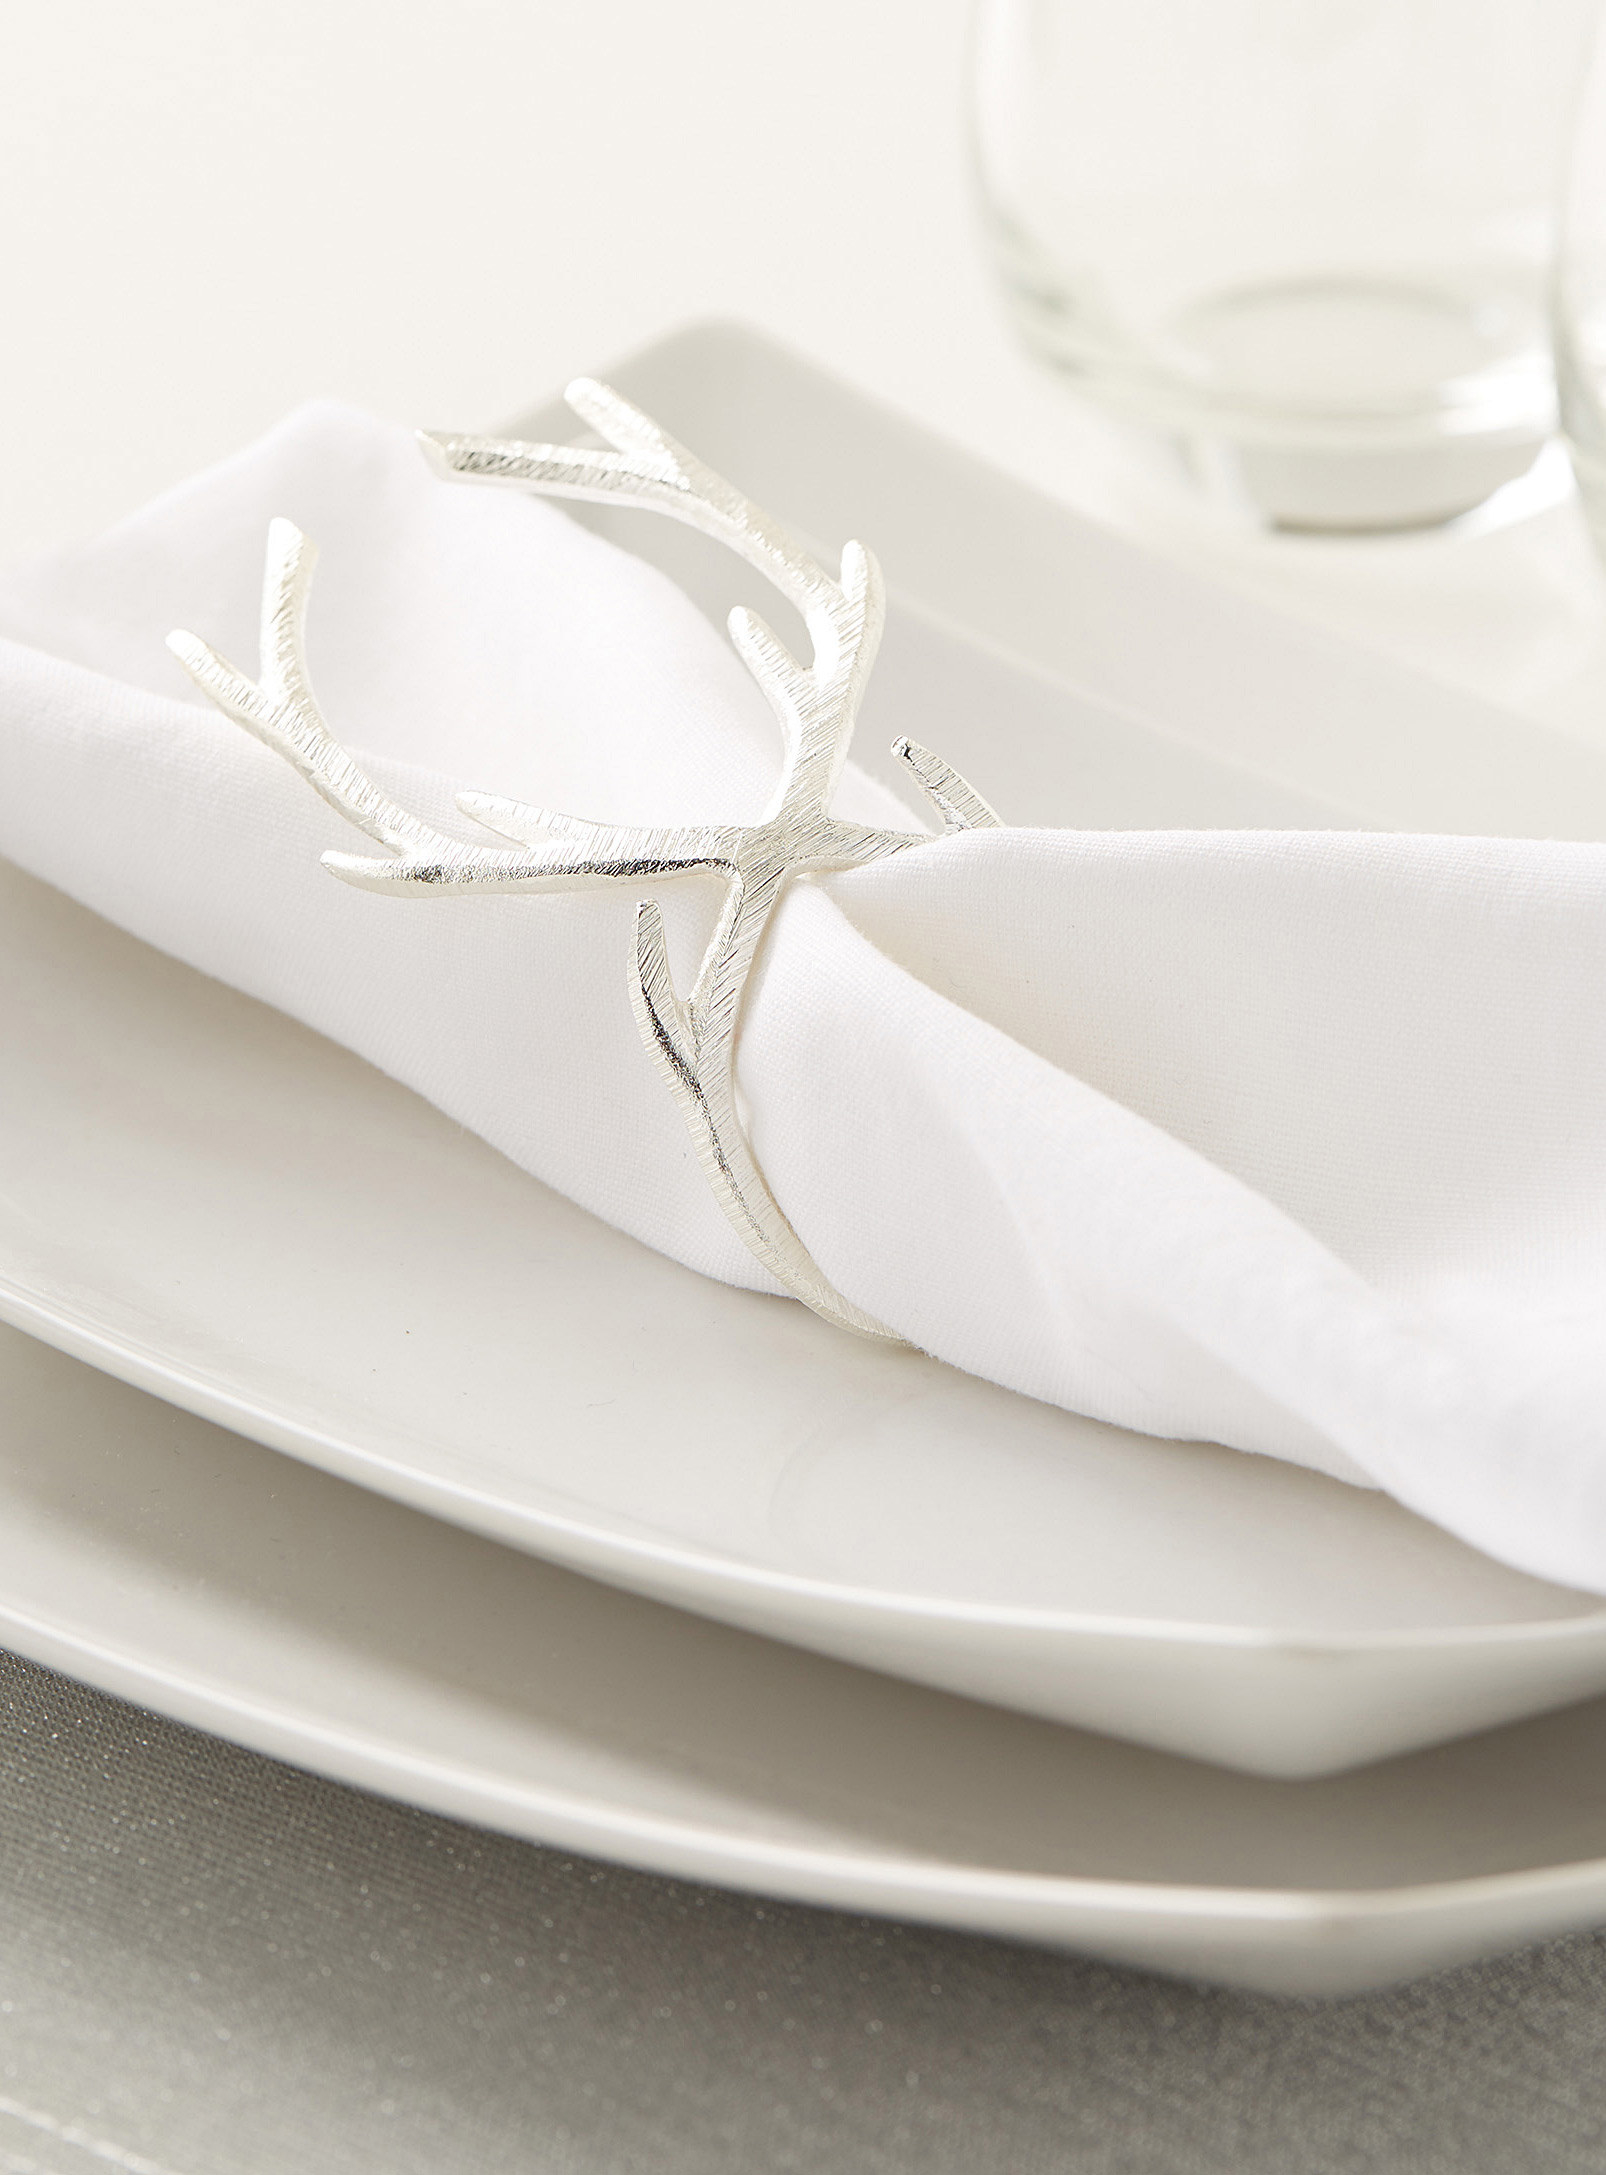 A napkin ring shaped like antlers